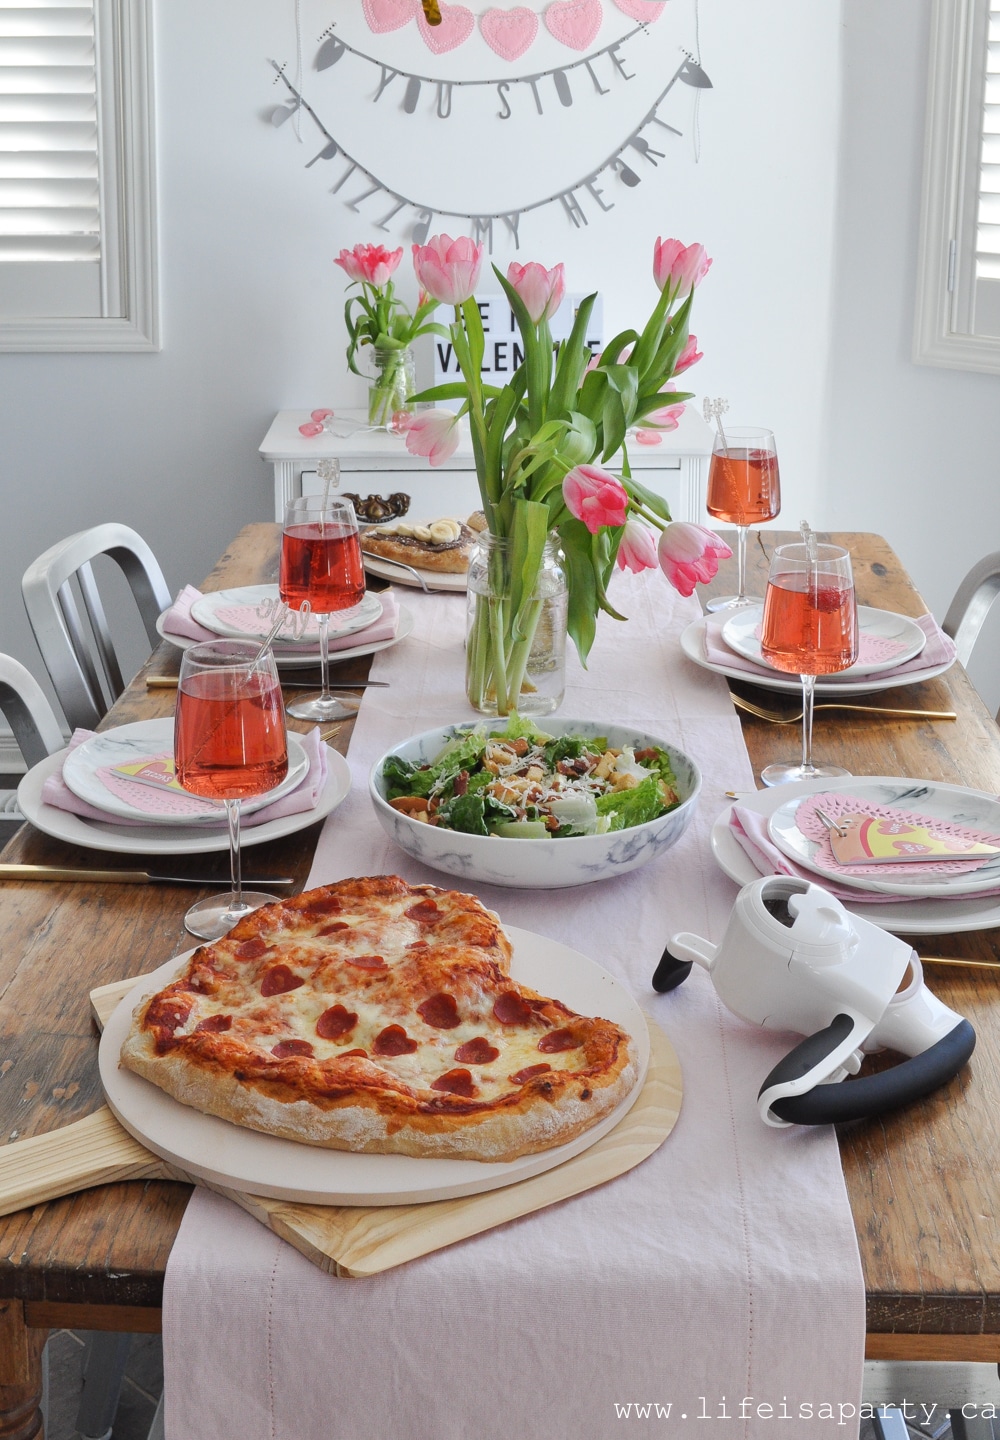 Valentine's Day Pizza Party -DIY decorations, heart shaped pizza, mocktails, and a dessert pizza recipe make this the perfect family celebration.